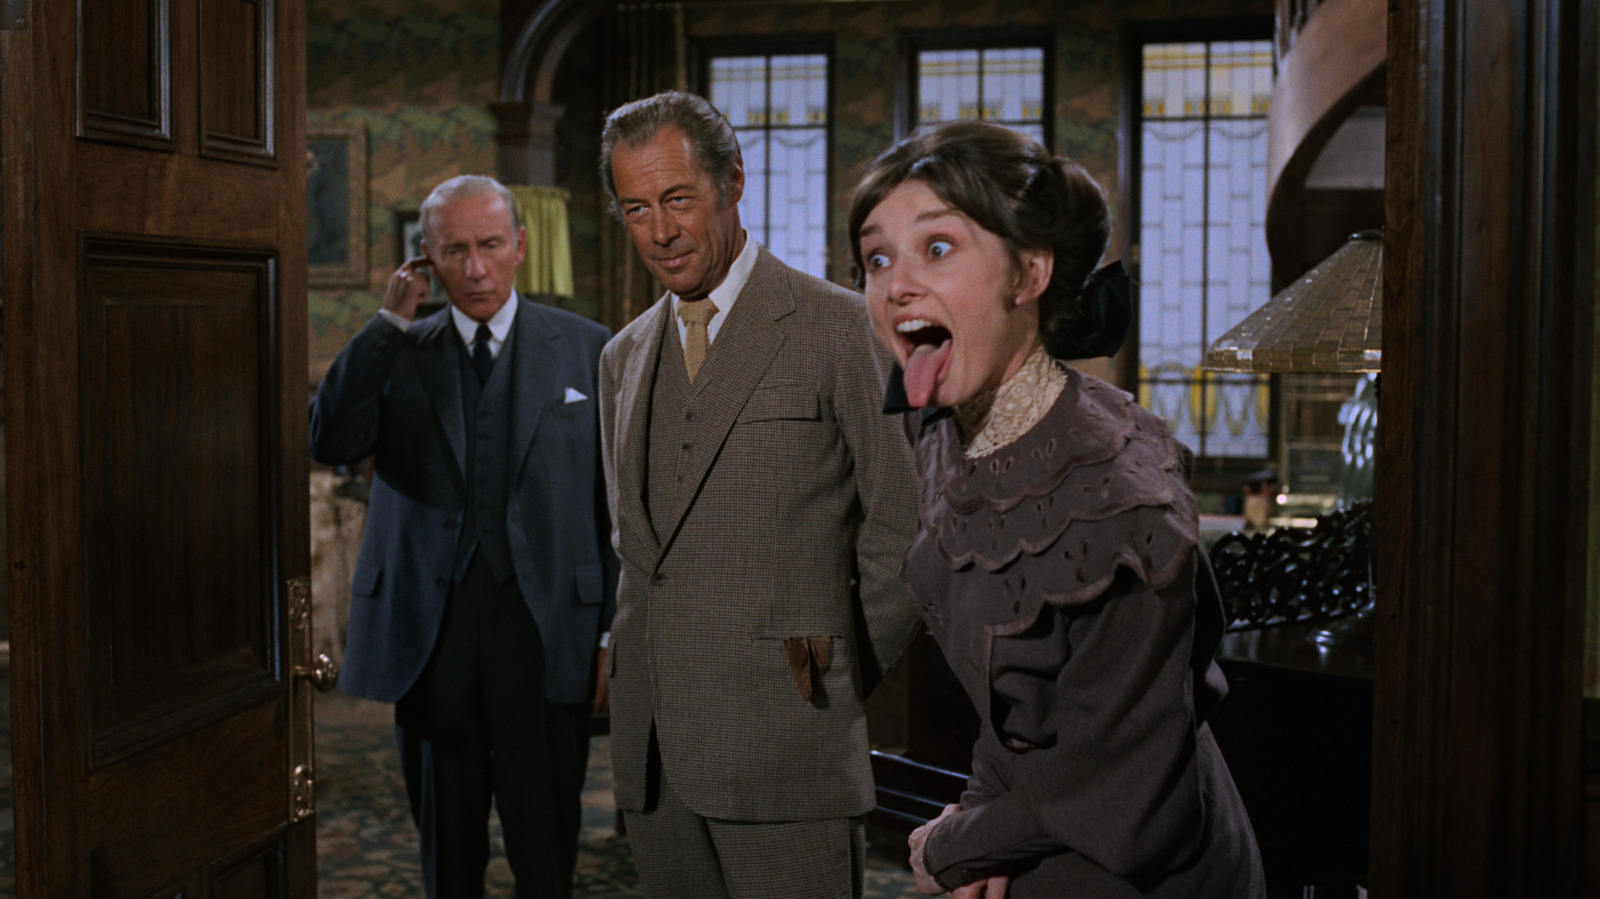 Audrey Hepburn Didn't Get Her Way When It Came To My Fair Lady